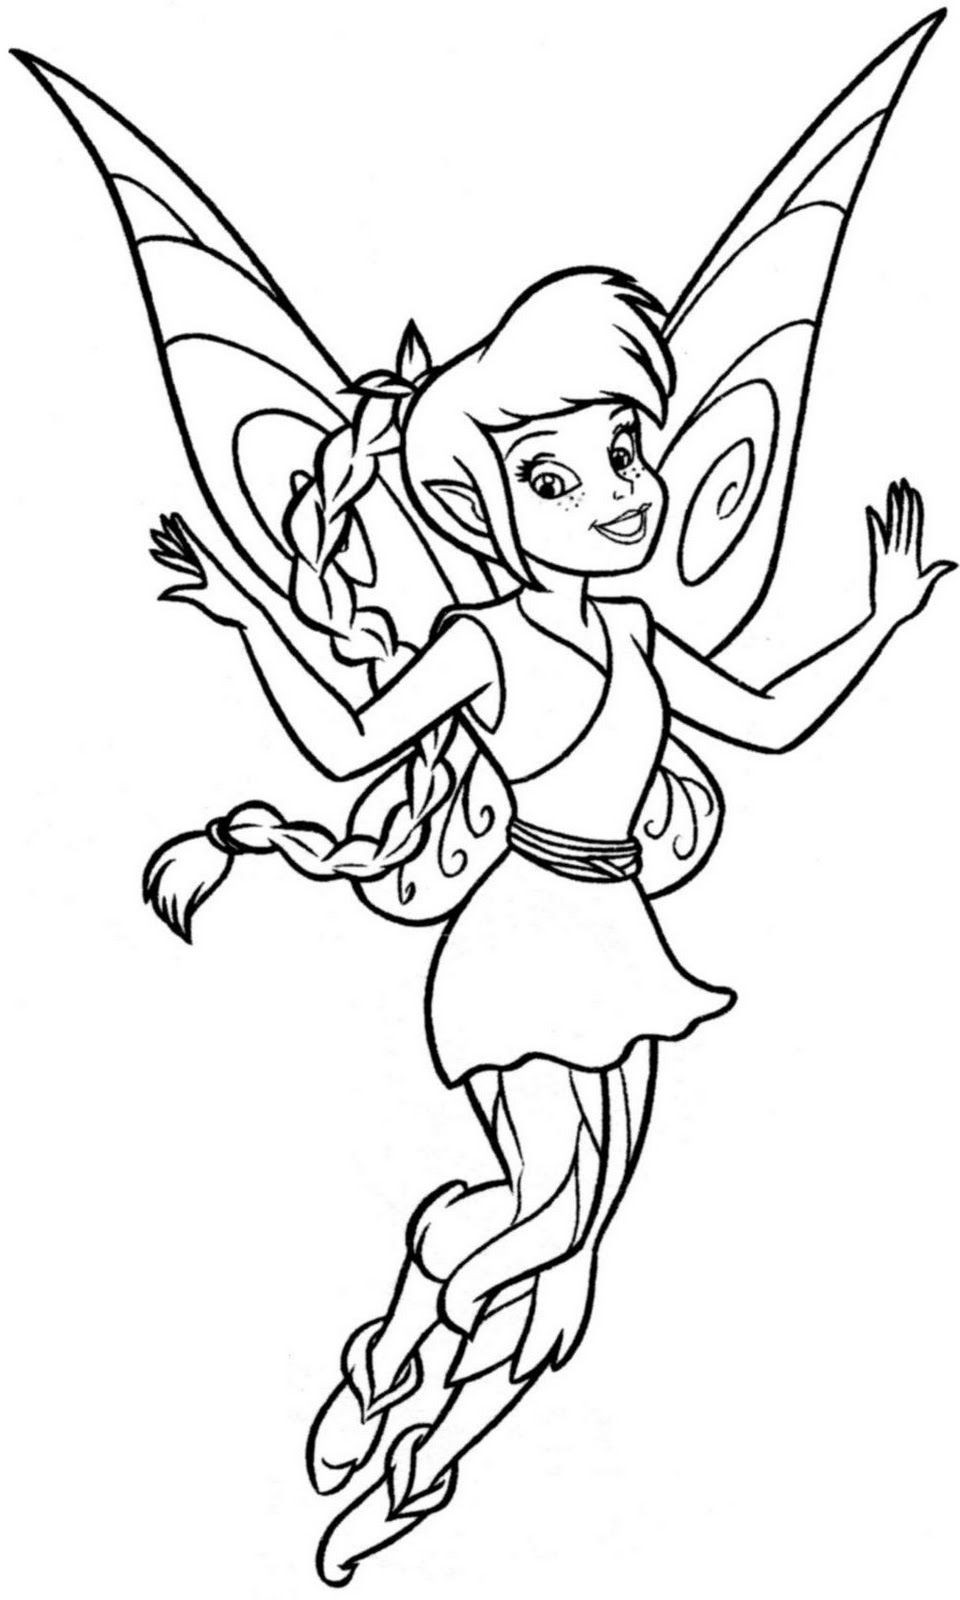 Tinkerbell Coloring Pages For Girls
 tinkerbell para colorear Buscar con Google